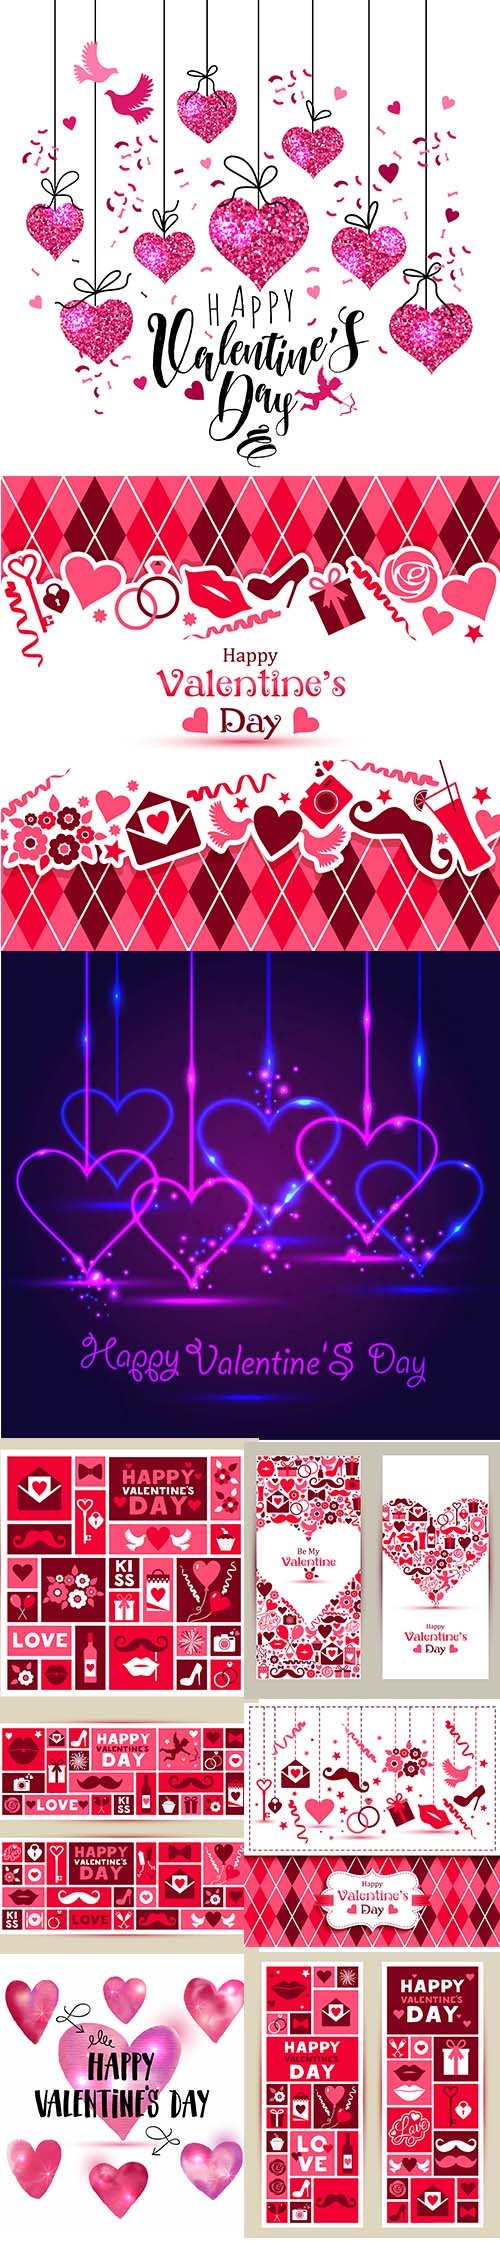 Set of Happy Valentines Day Vector Illustrations